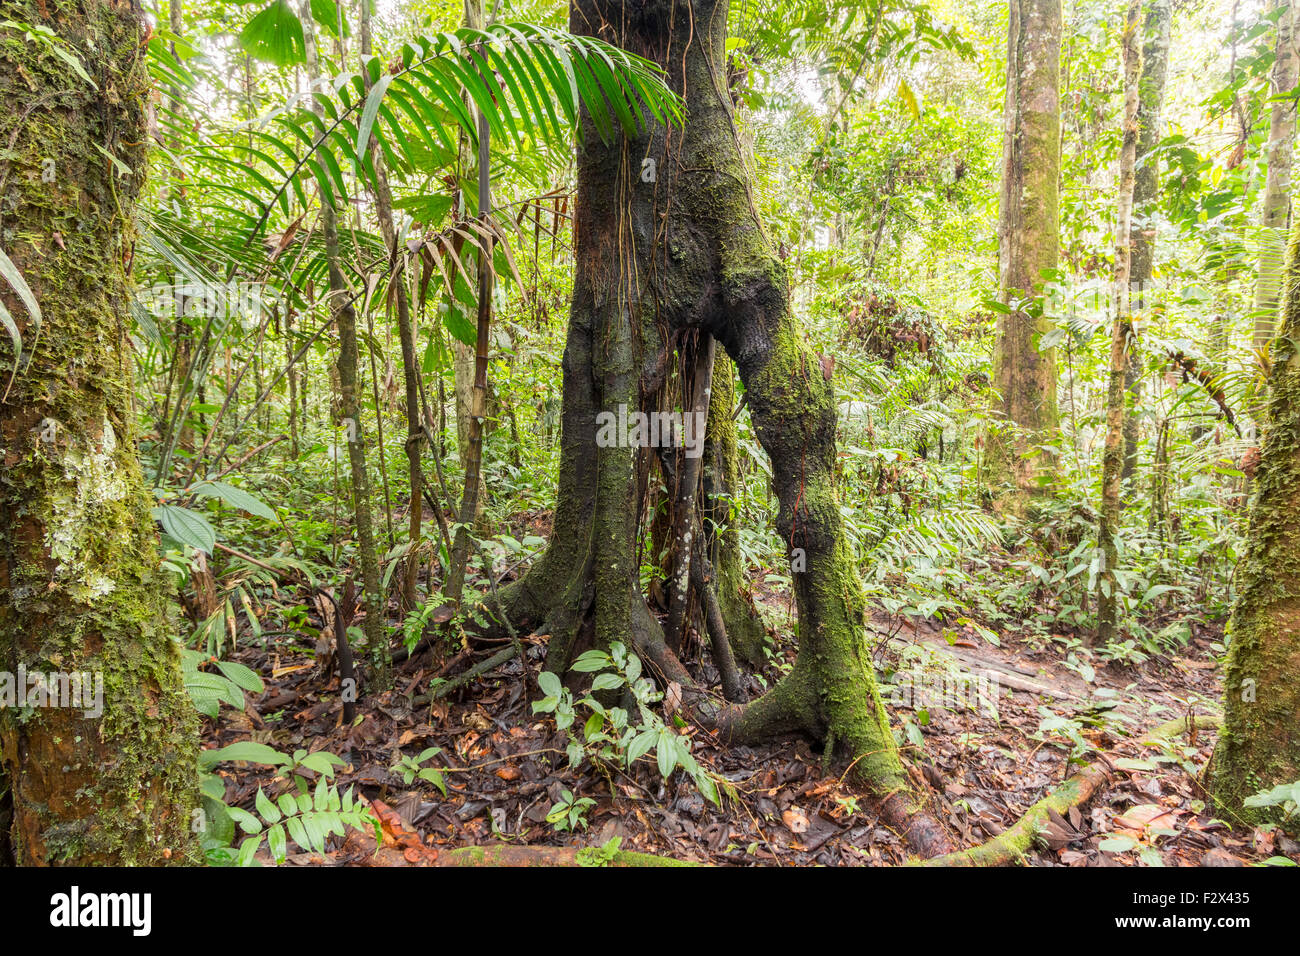 Tree with stilt roots in the Ecuadorian Amazon. HDR image Stock Photo